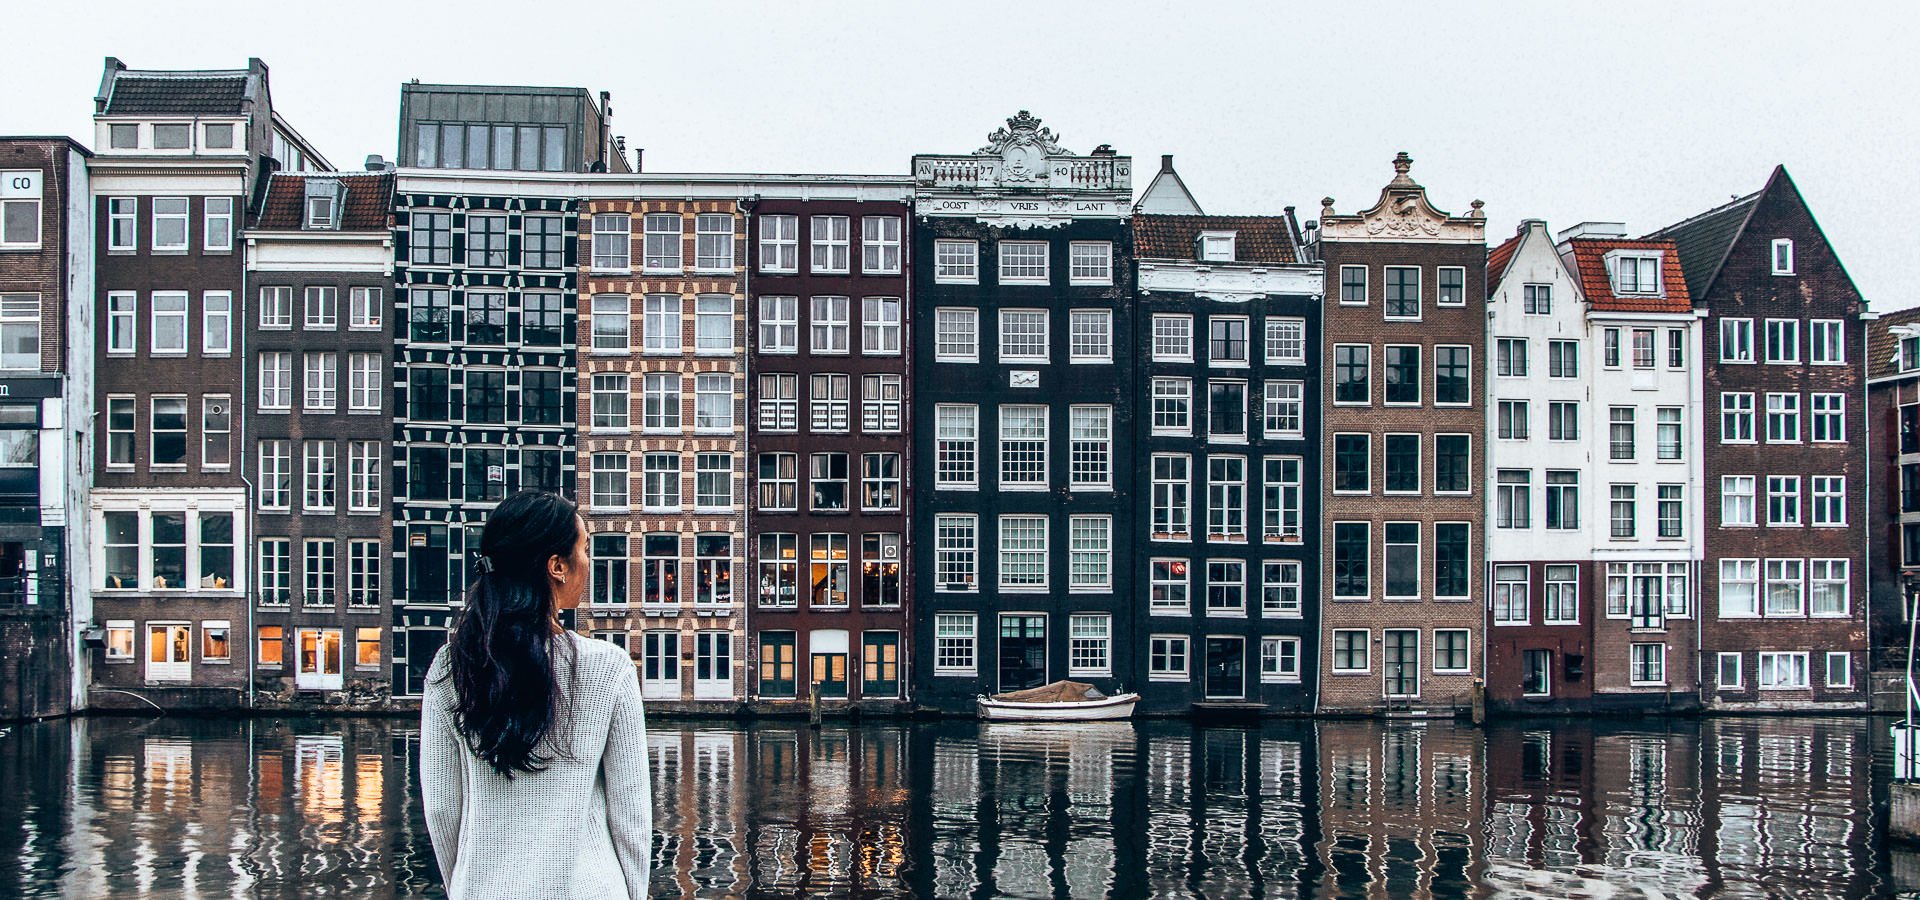 A Non Touristy Weekend Guide To Amsterdam | non touristy weekend guide amsterdam 1